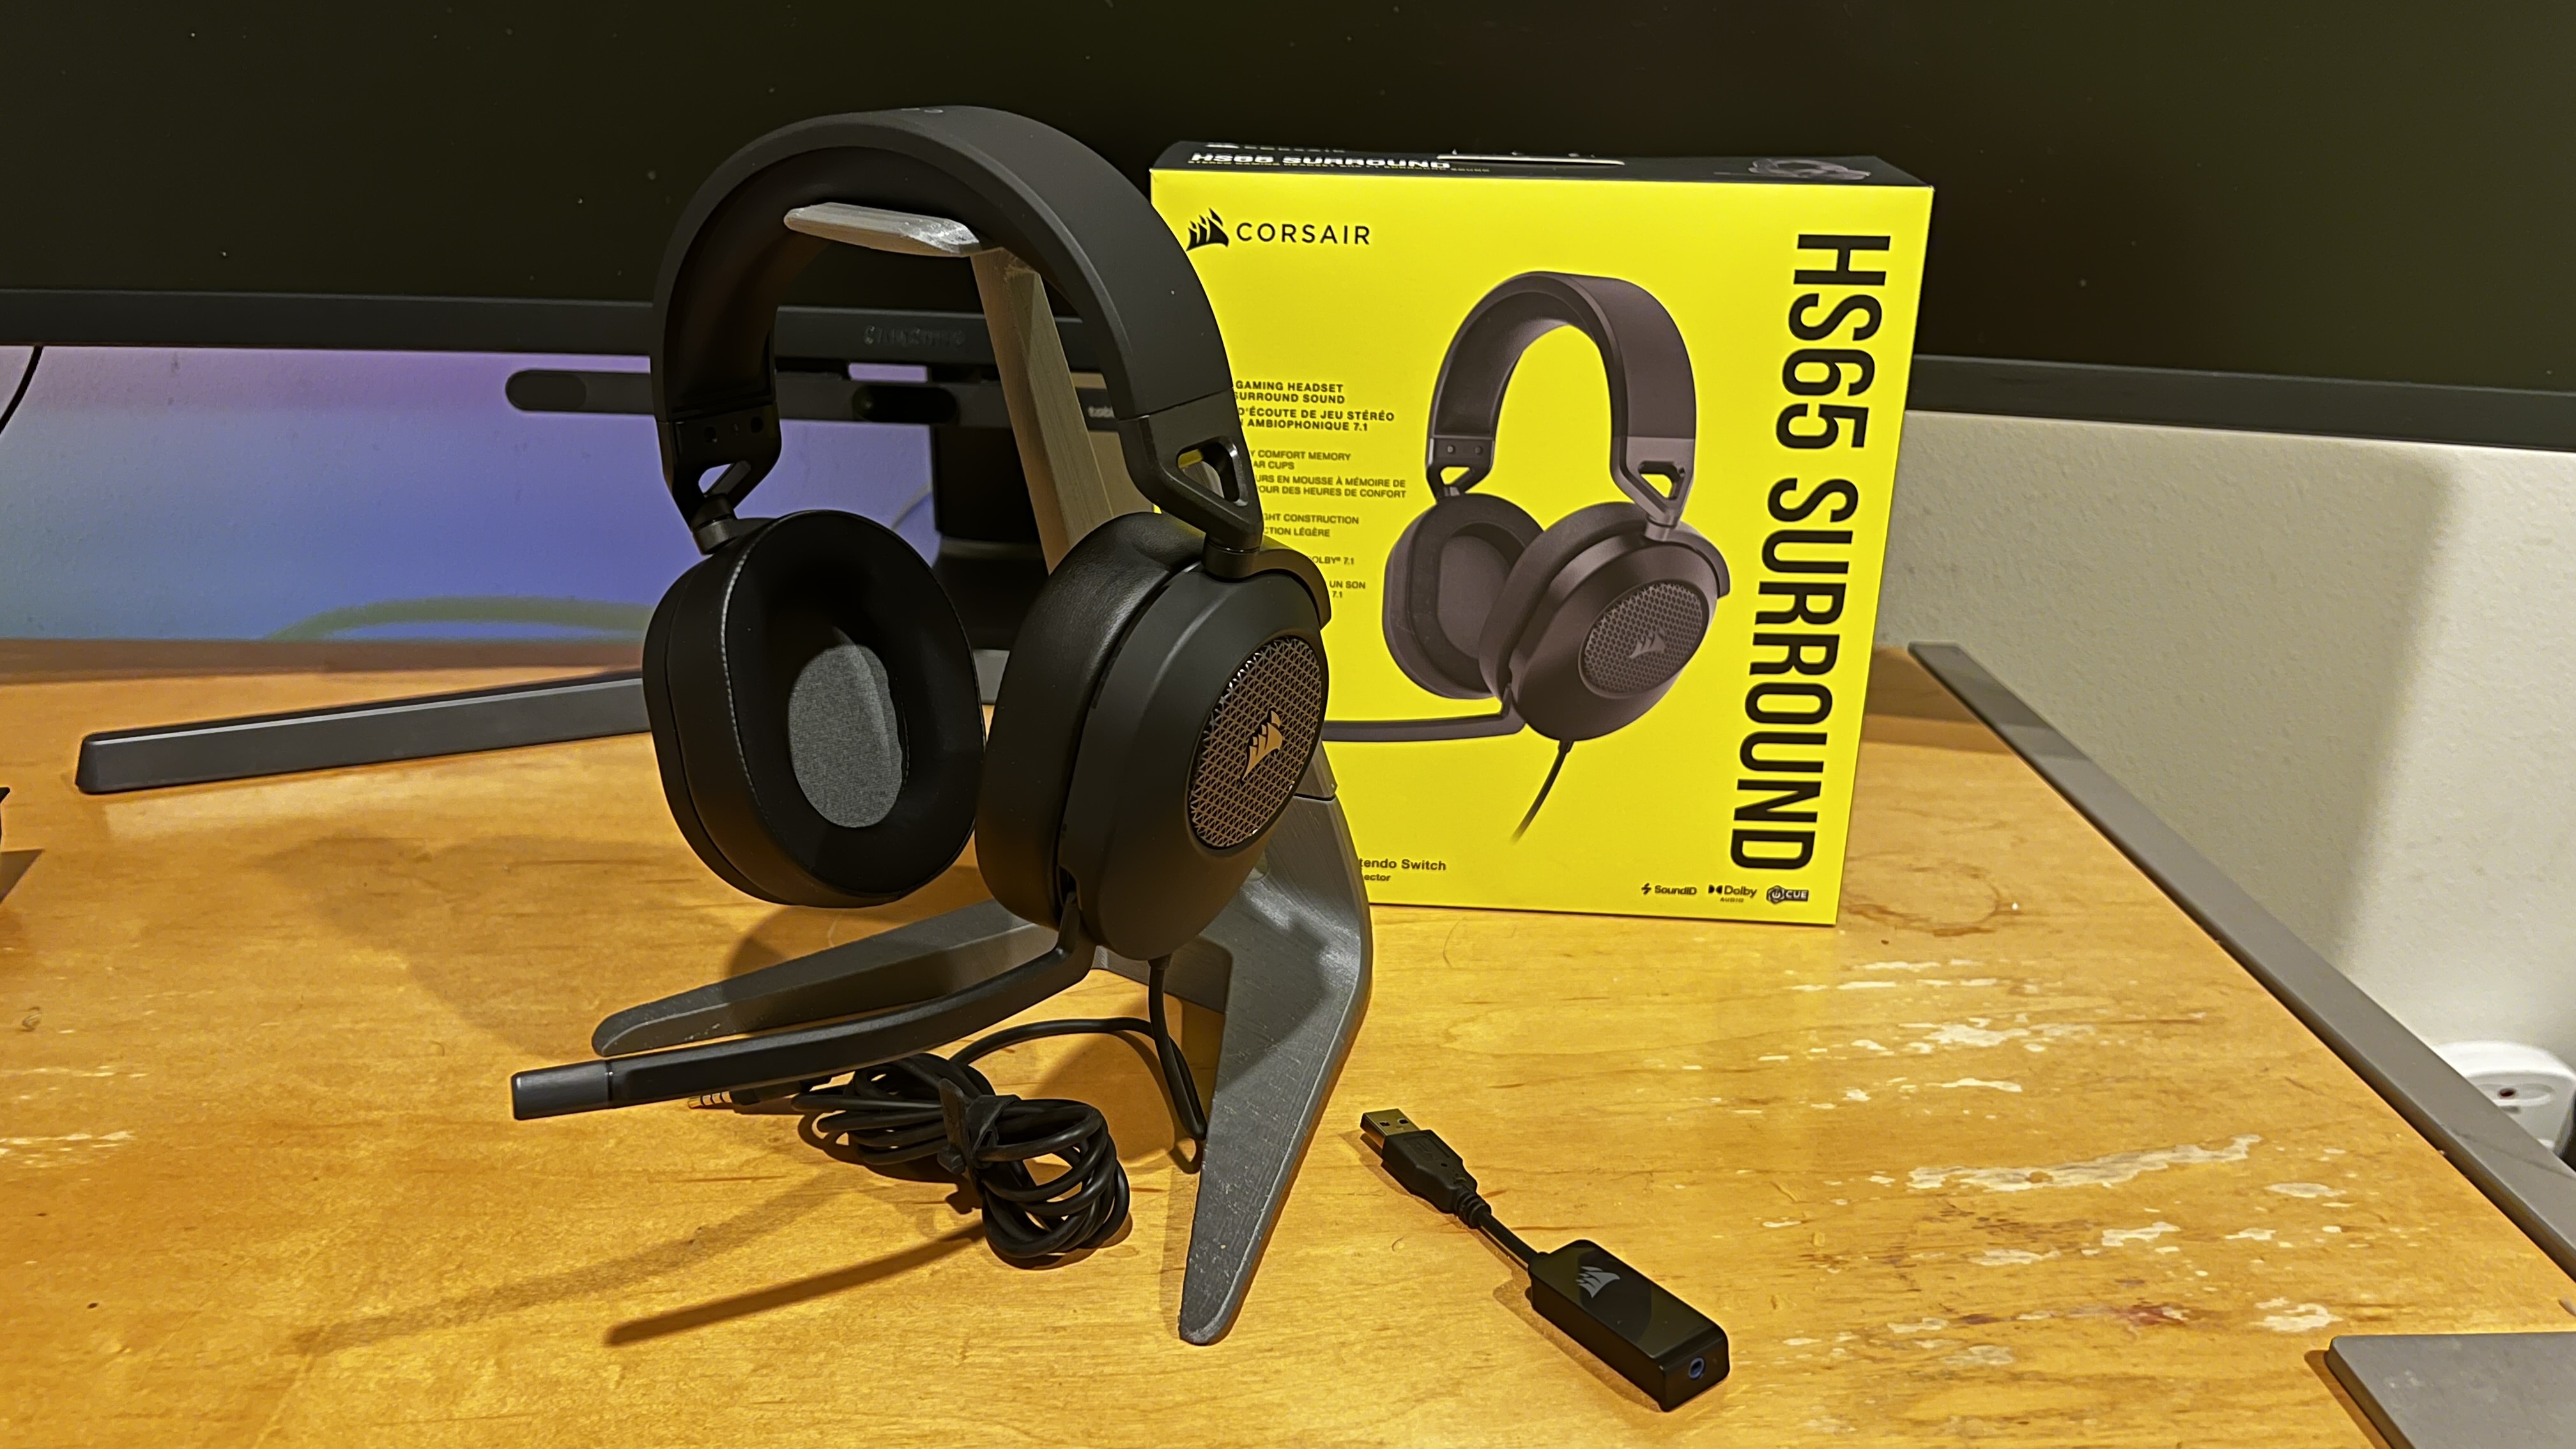 mikroskop Limited Kritisk Corsair HS65 Surround Headset Review: Medium Price, High-Quality Sound |  Tom's Hardware